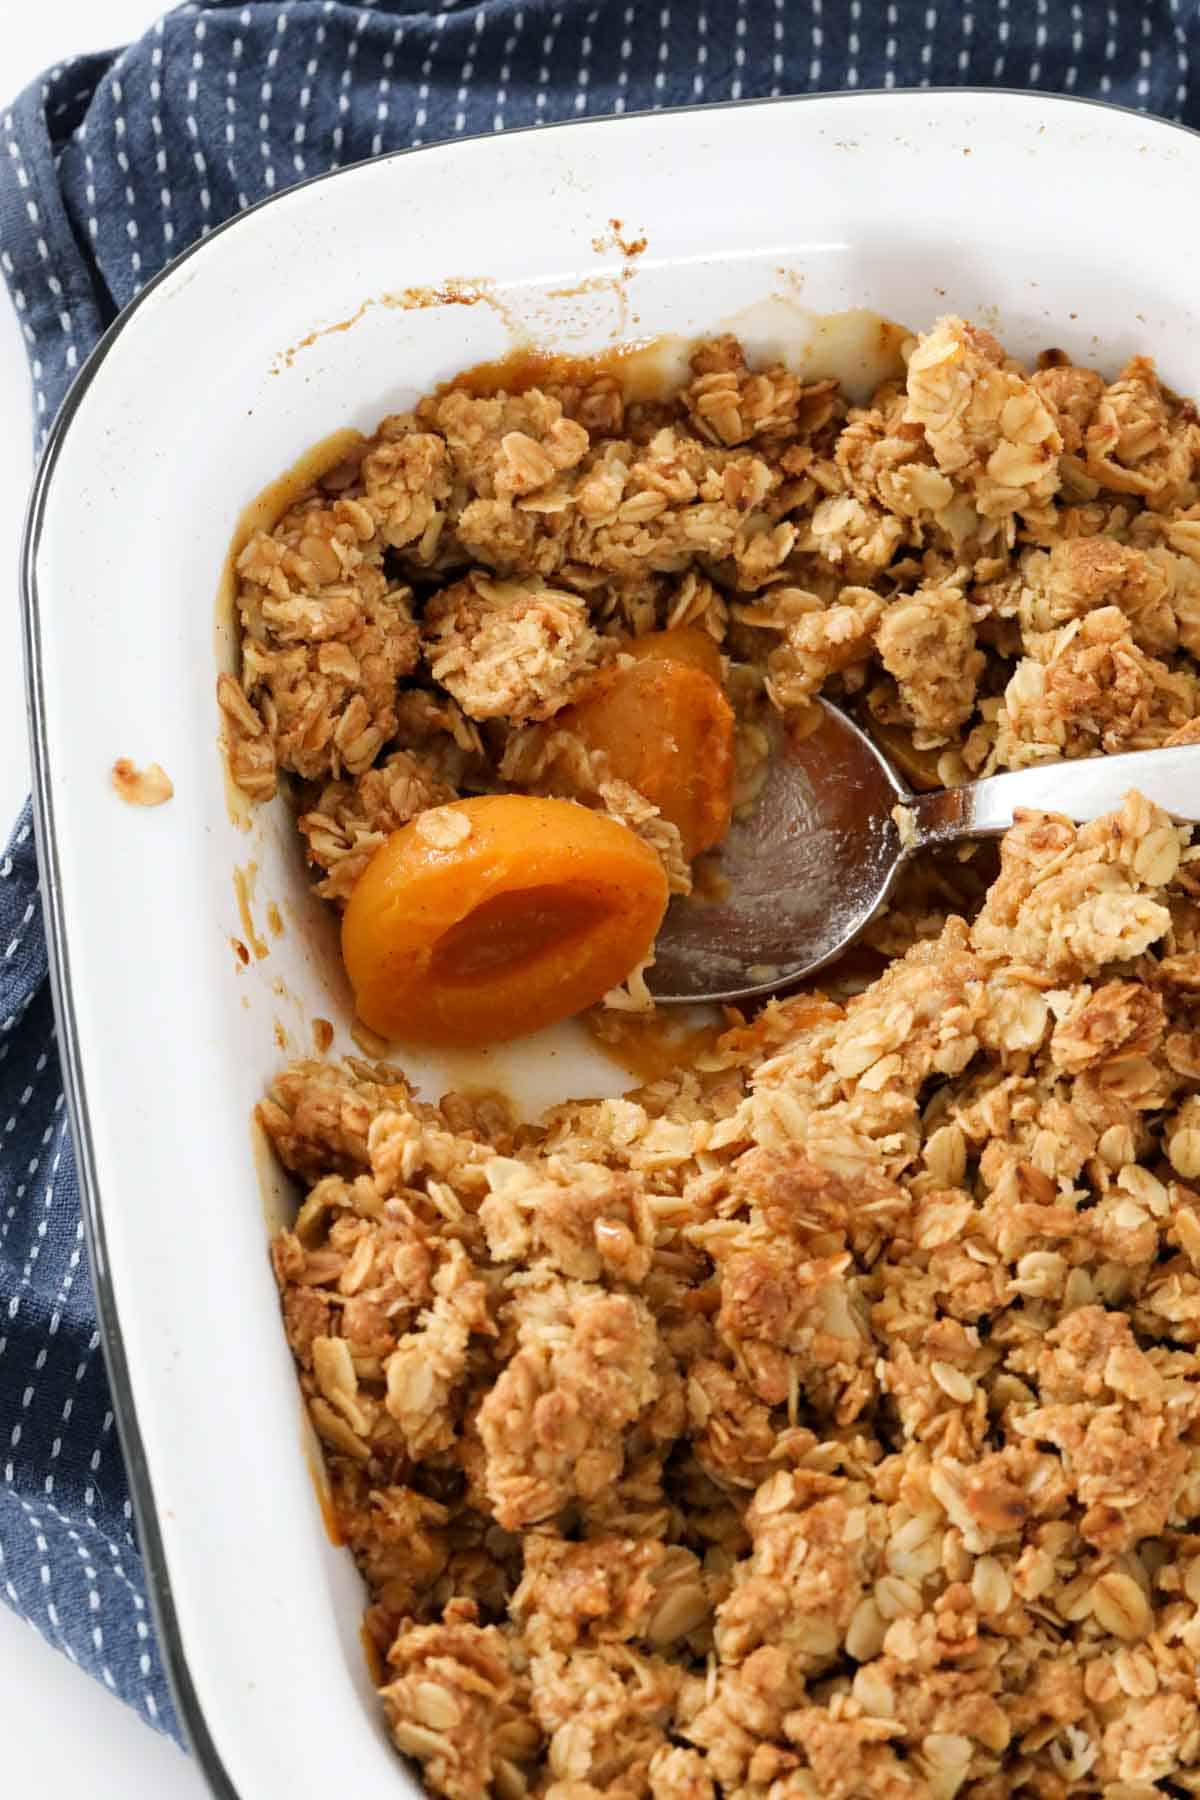 A dish of oat crumble with a portion removed and a spoon in the dish.